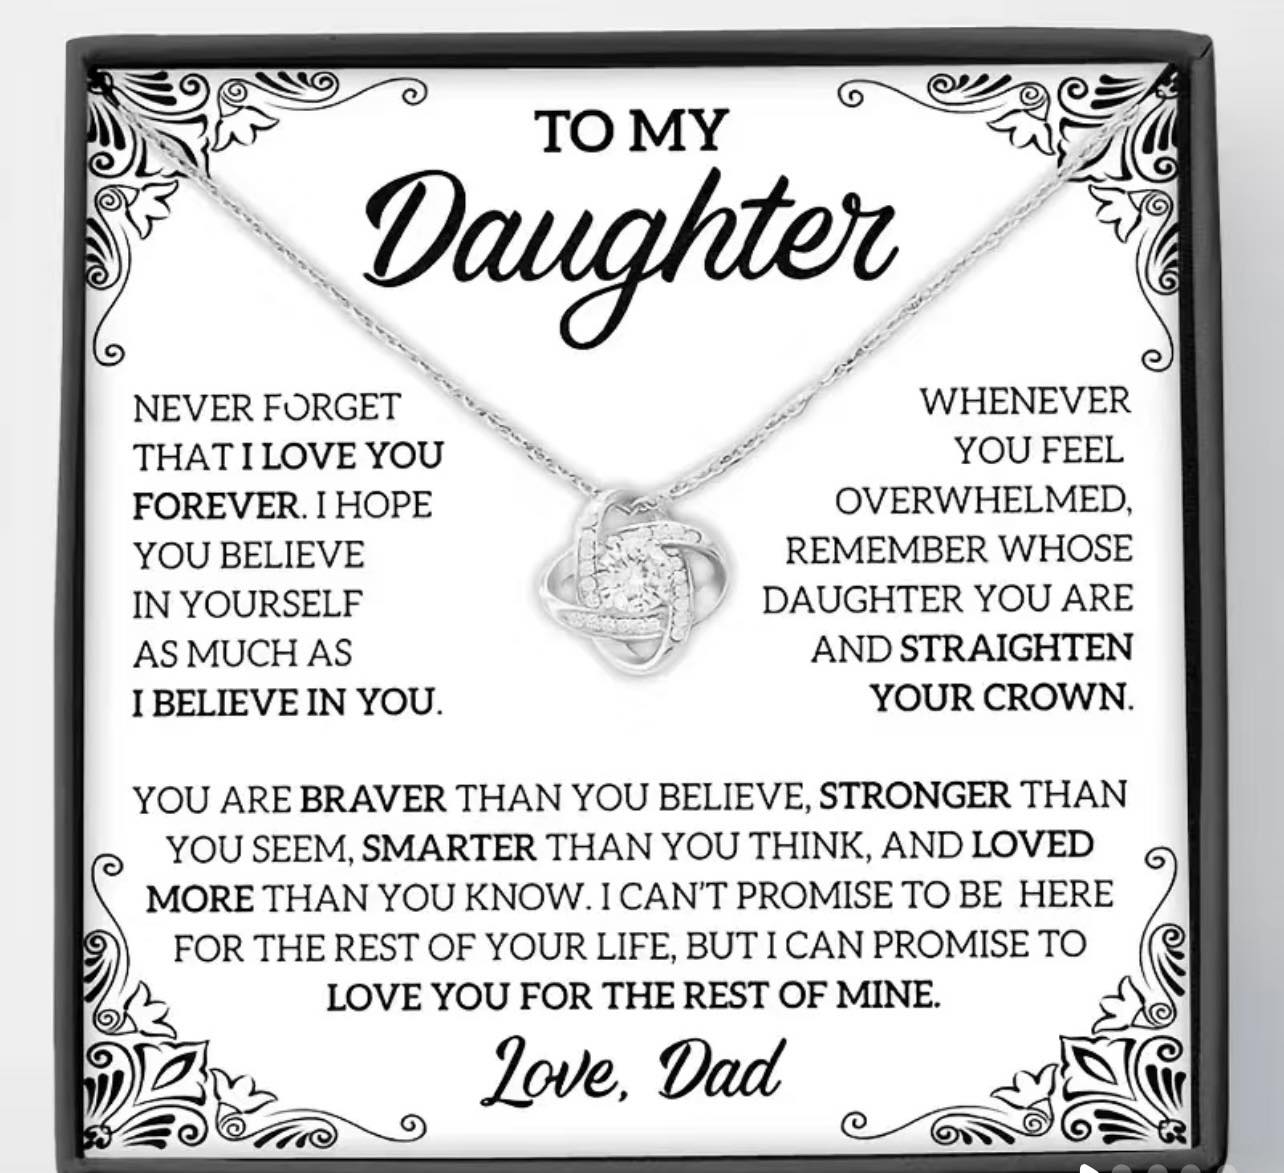 To daughter from dad necklace gift set.